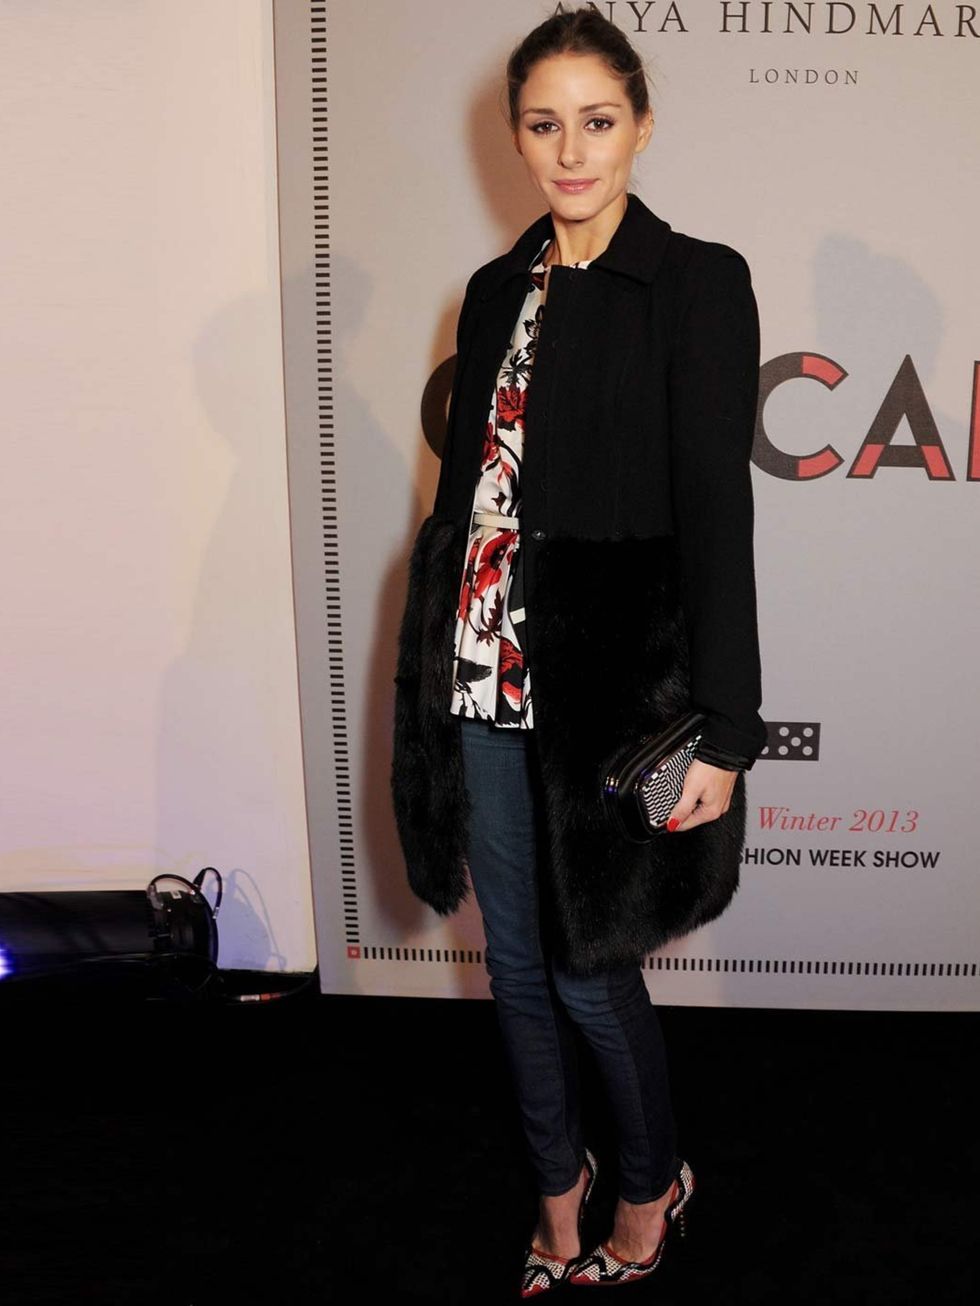 <p><a href="http://www.elleuk.com/star-style/celebrity-style-files/olivia-palermo">Olivia Palermo</a> at the <a href="http://www.elleuk.com/catwalk/designer-a-z/anya-hindmarch/autumn-winter-2013">Anya Hindmarch Autumn Winter 13 show</a>.</p>